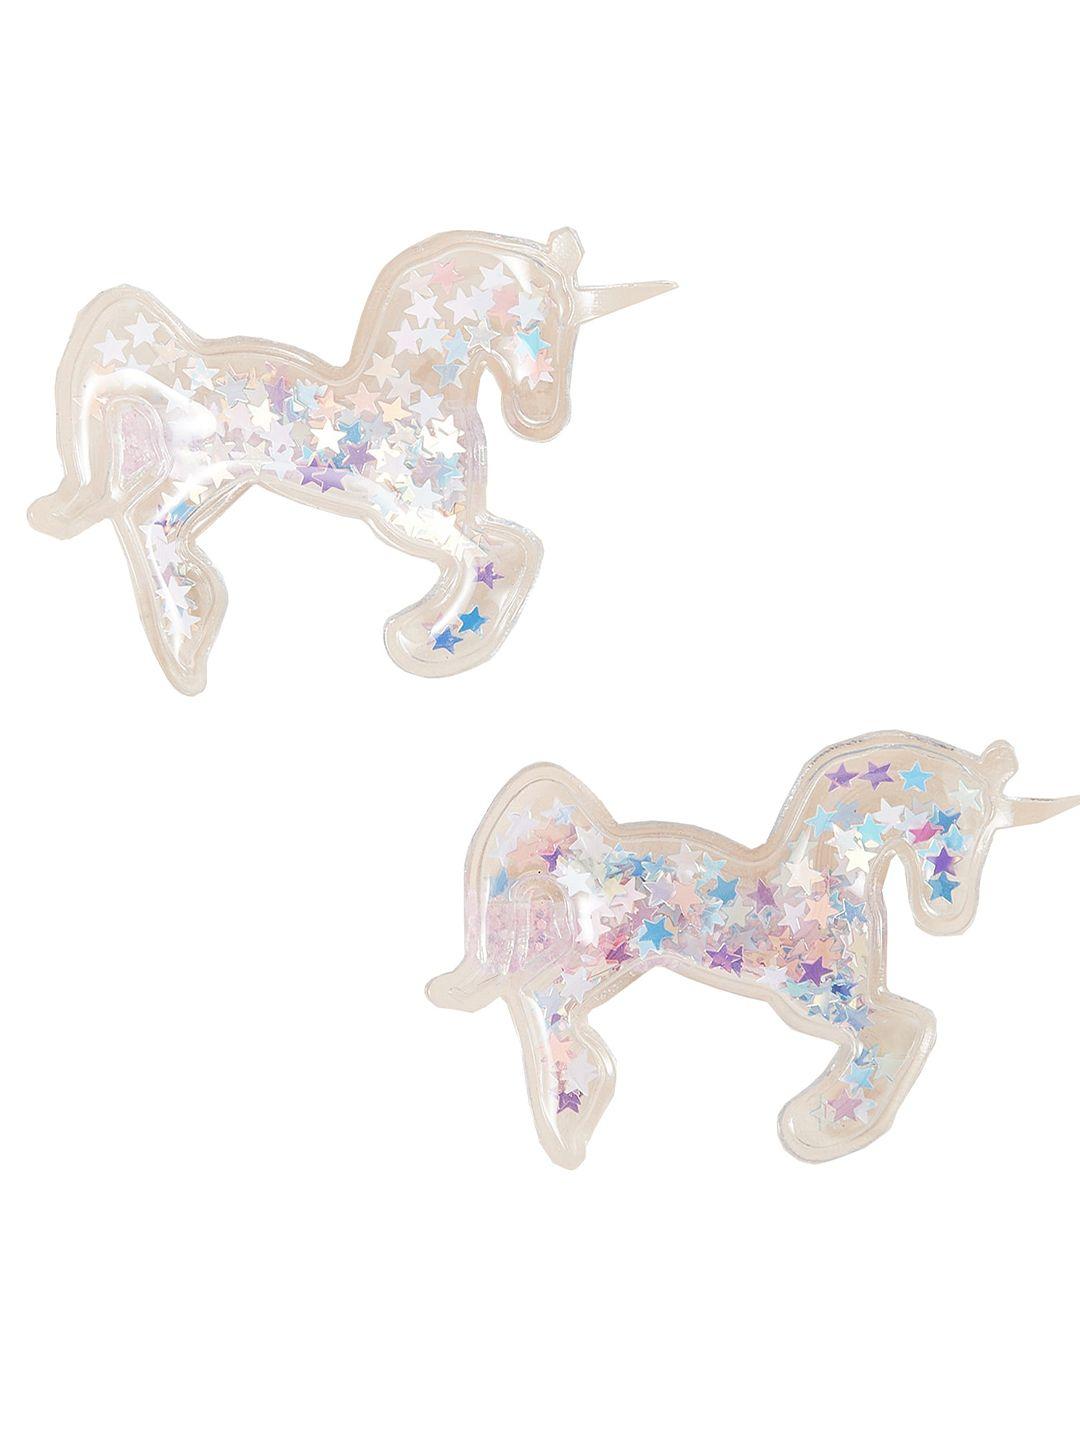 accessorize girls set of 2 tic tac hair clip